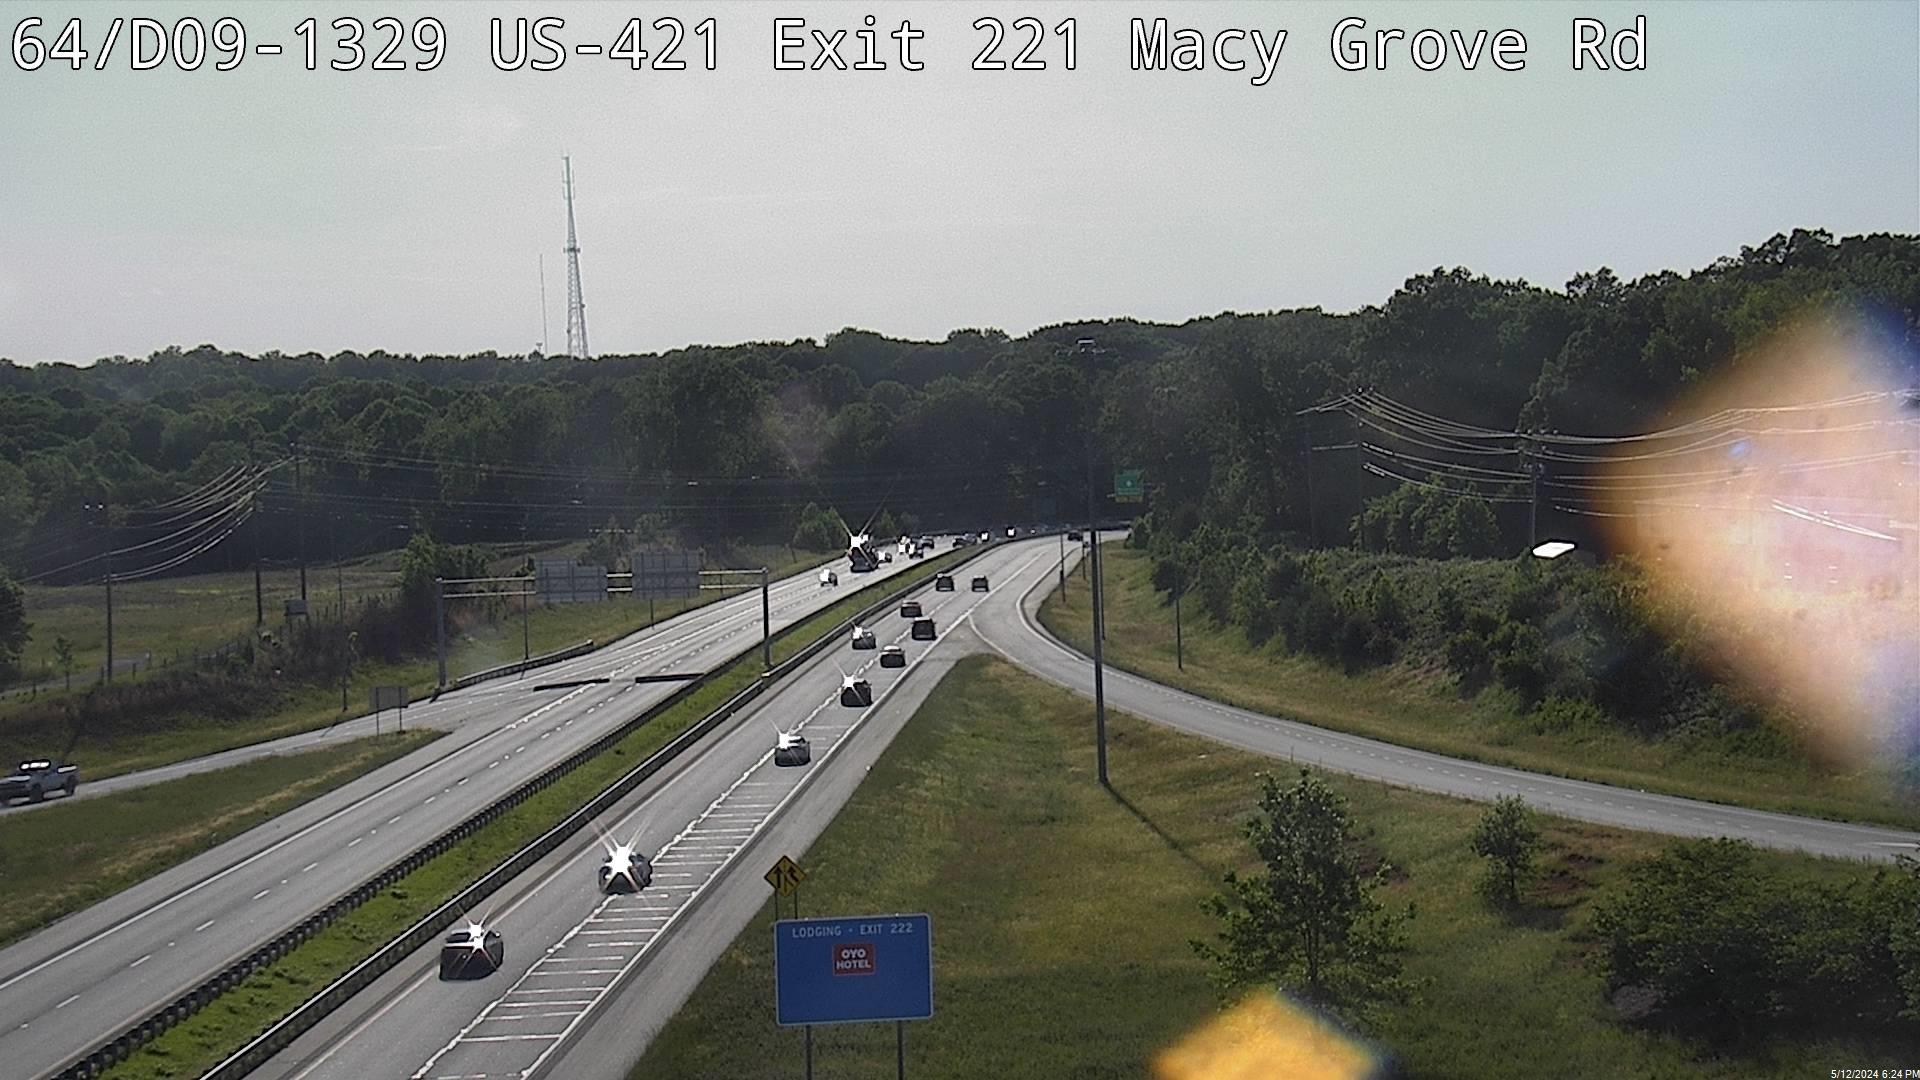 I-40 Business at Macy Grove Rd - Mile Marker 17 Traffic Camera